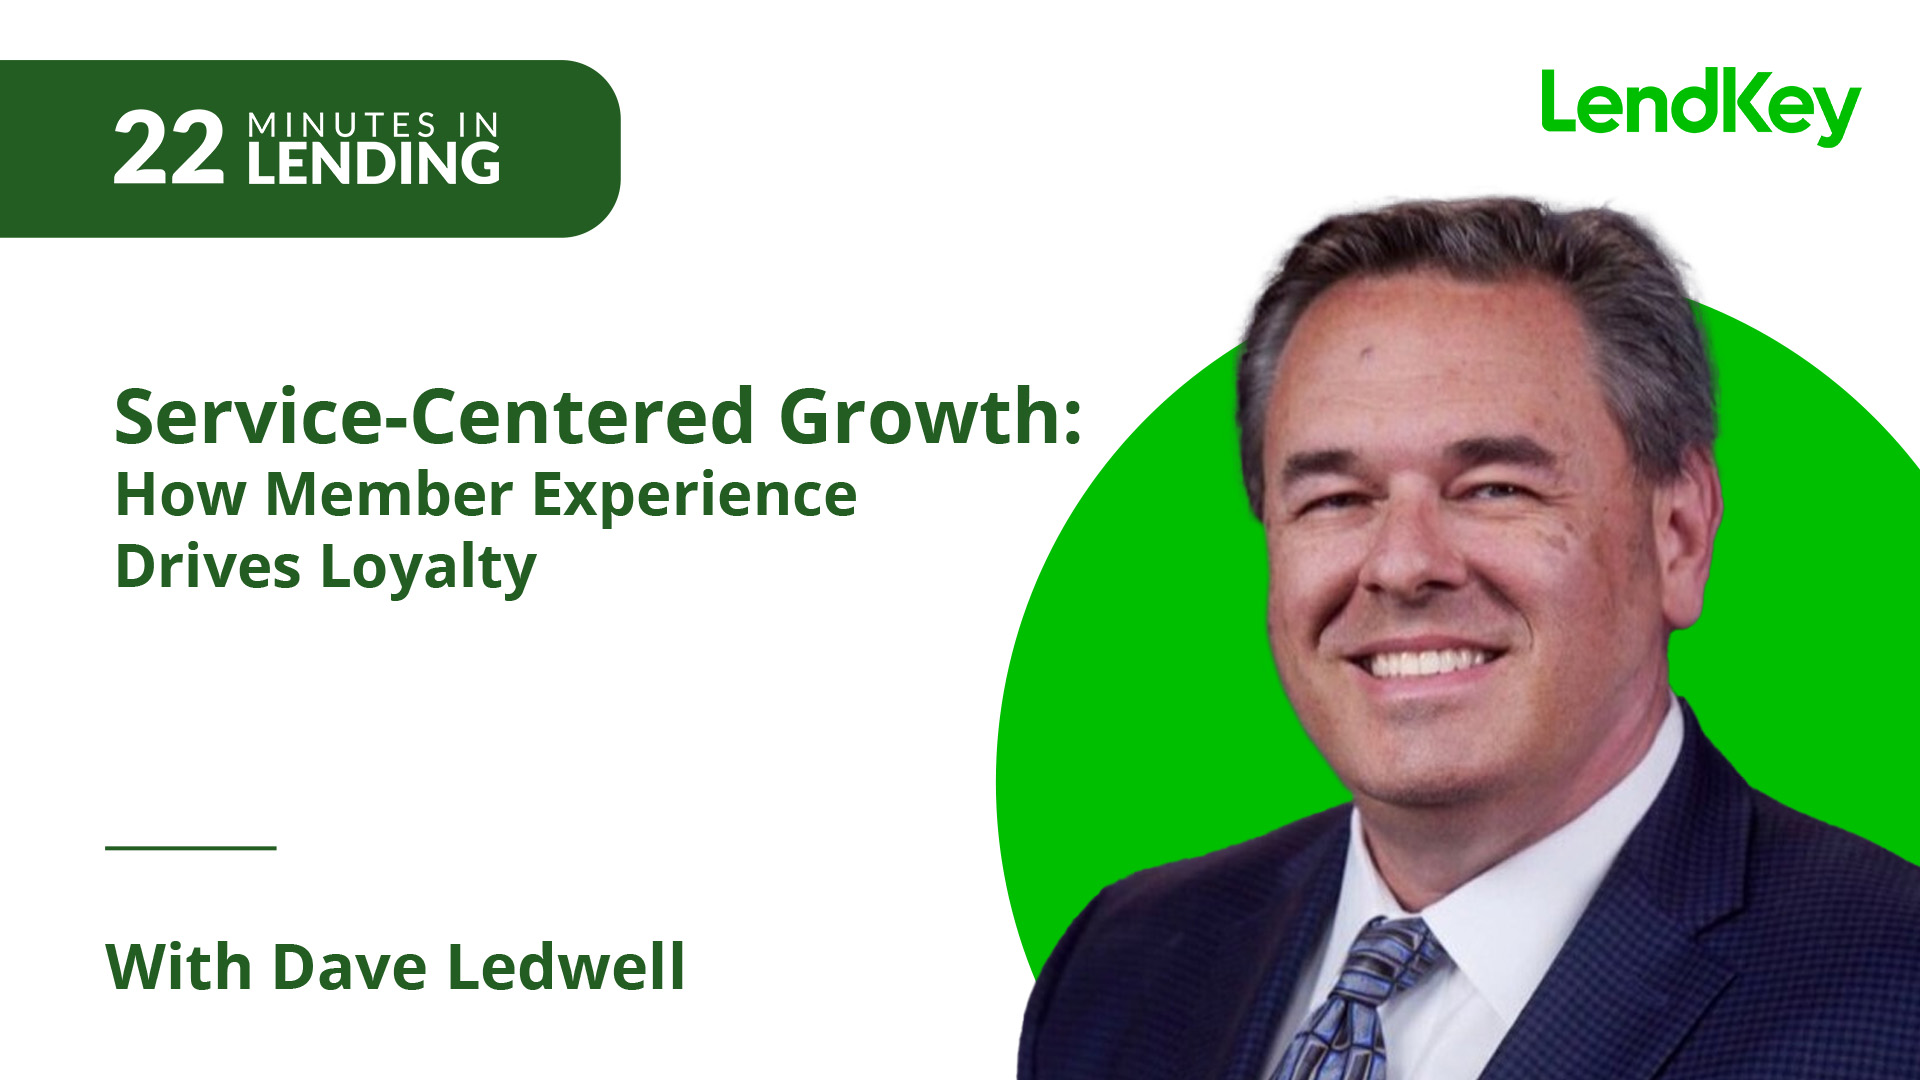 Service-Centered Growth: How Member Experience Drives Loyalty